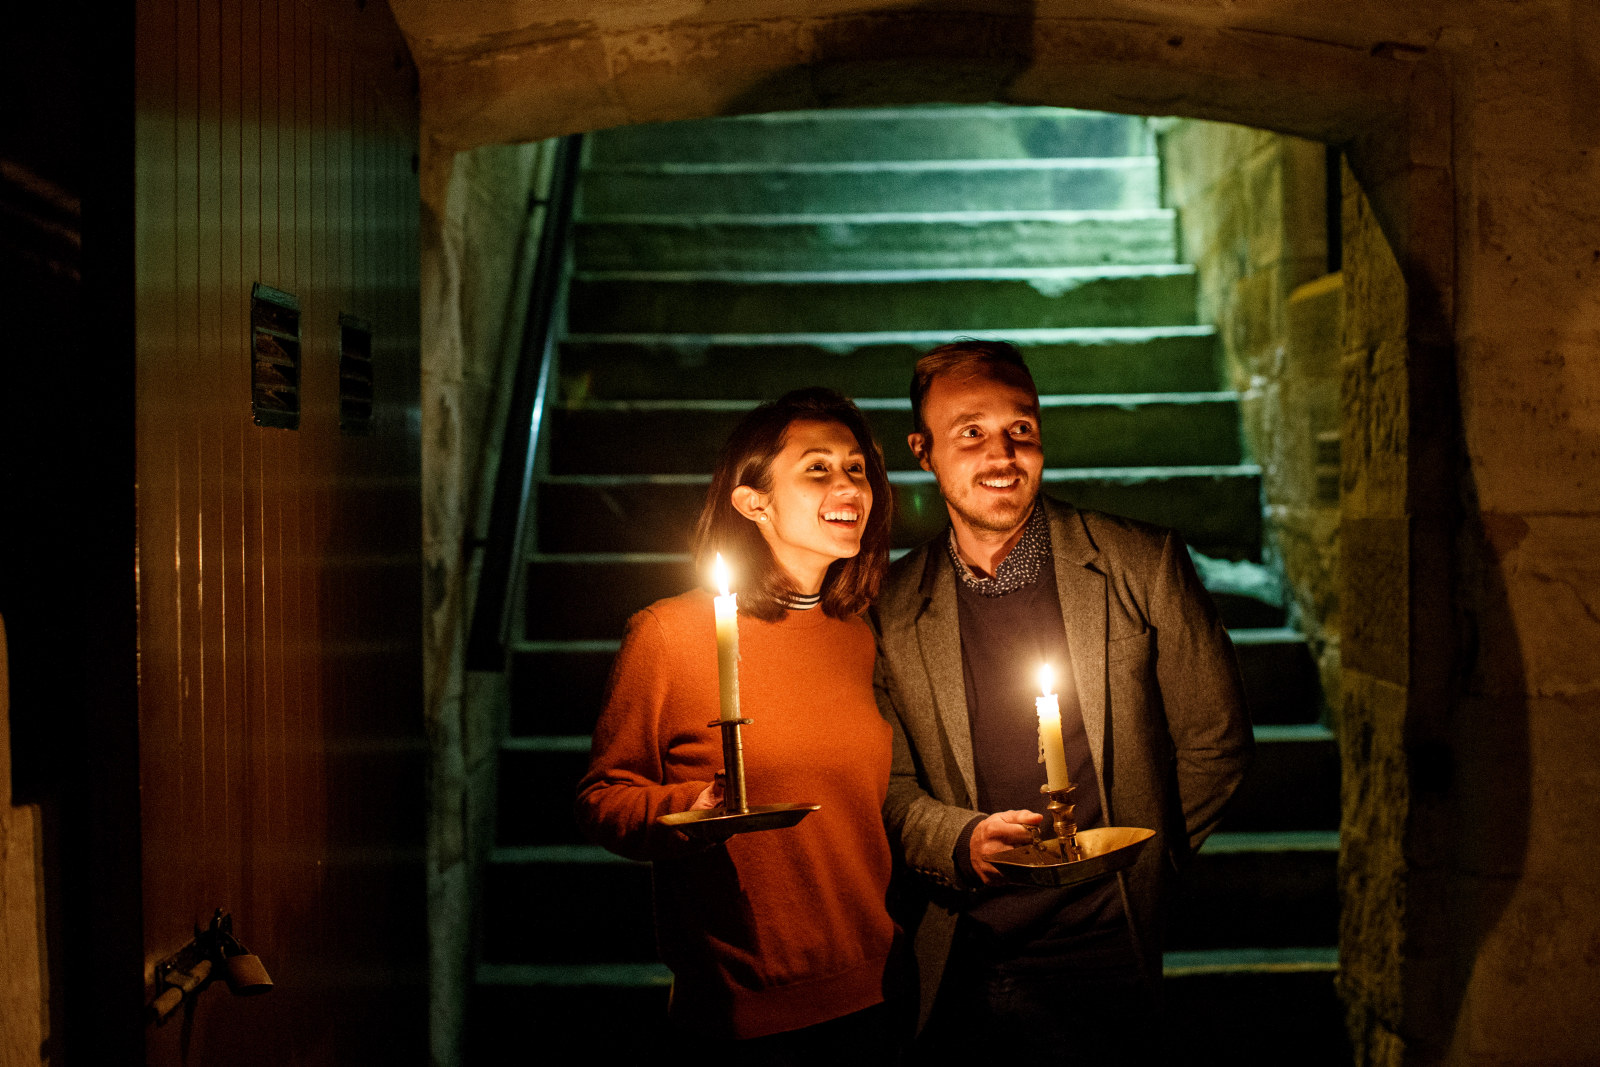 Paul Bennetts and Julie McTernan entering the Cellar holding candles at Elizabeth Bay House